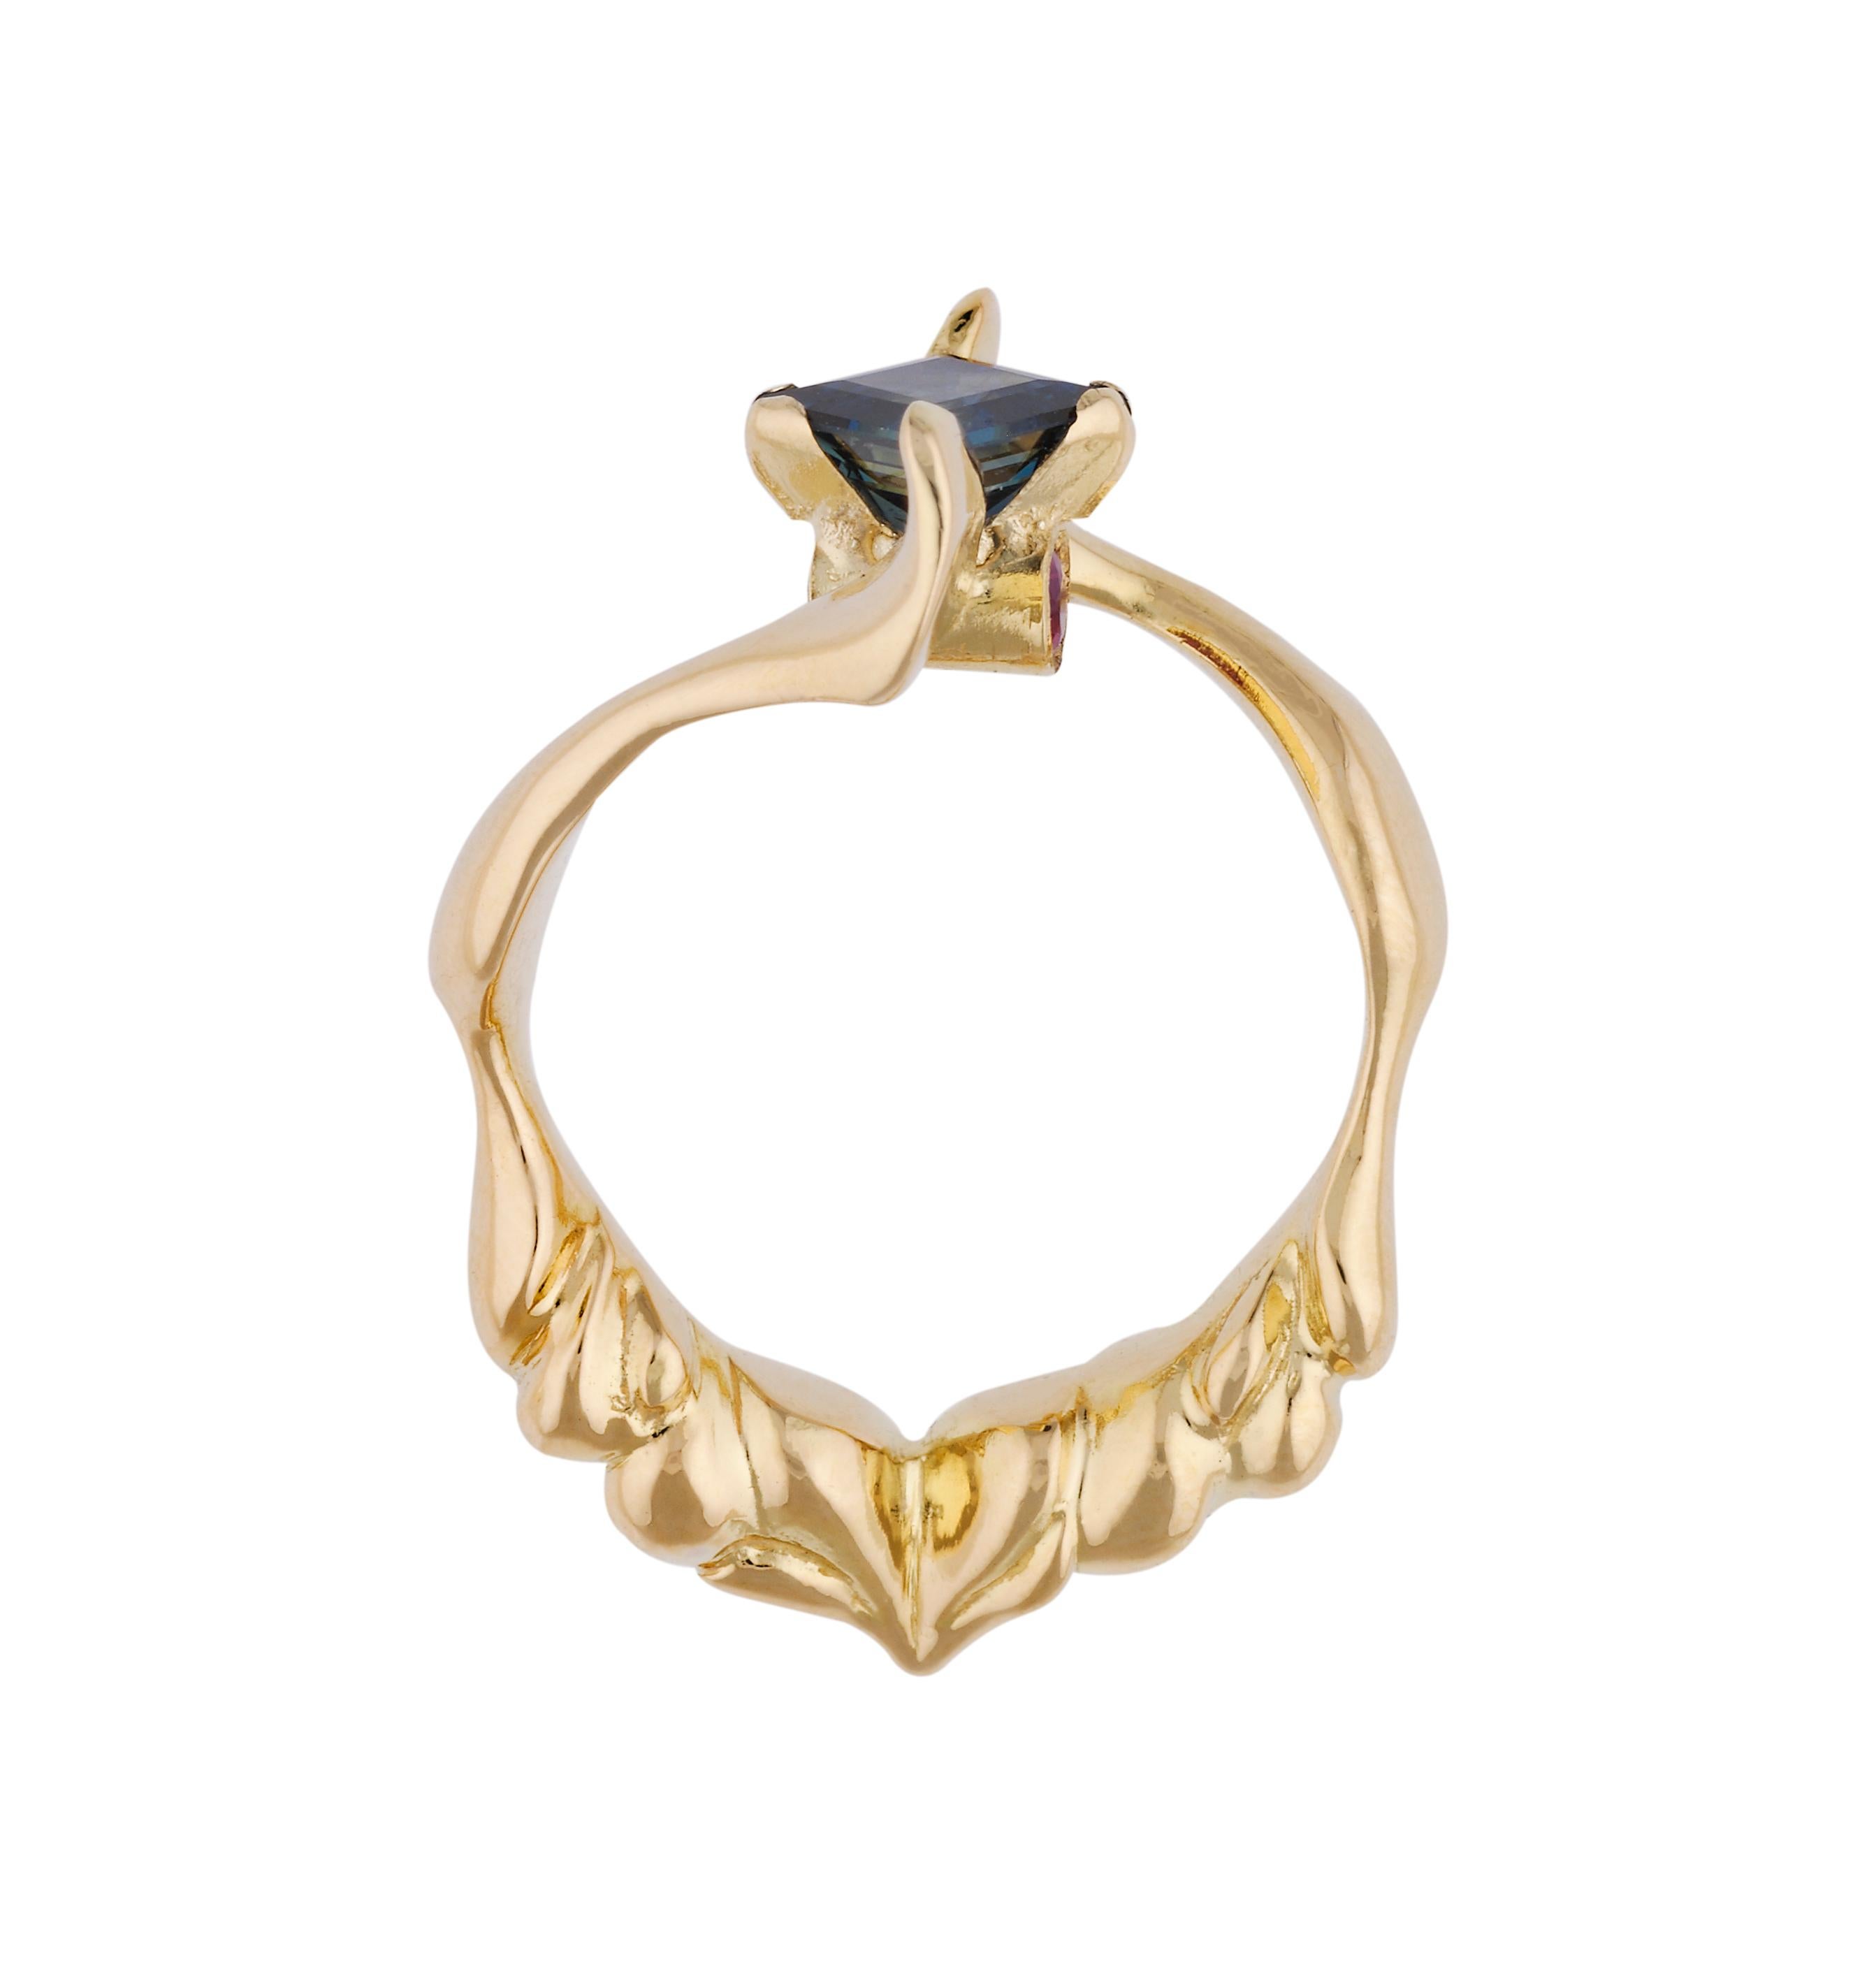 This modern handmade British-London Hallmarked 18 karat yellow gold ring, set with princess cut sapphire and ruby on the side is from MAIKO NAGAYAMA's Haute Couture Collection called 